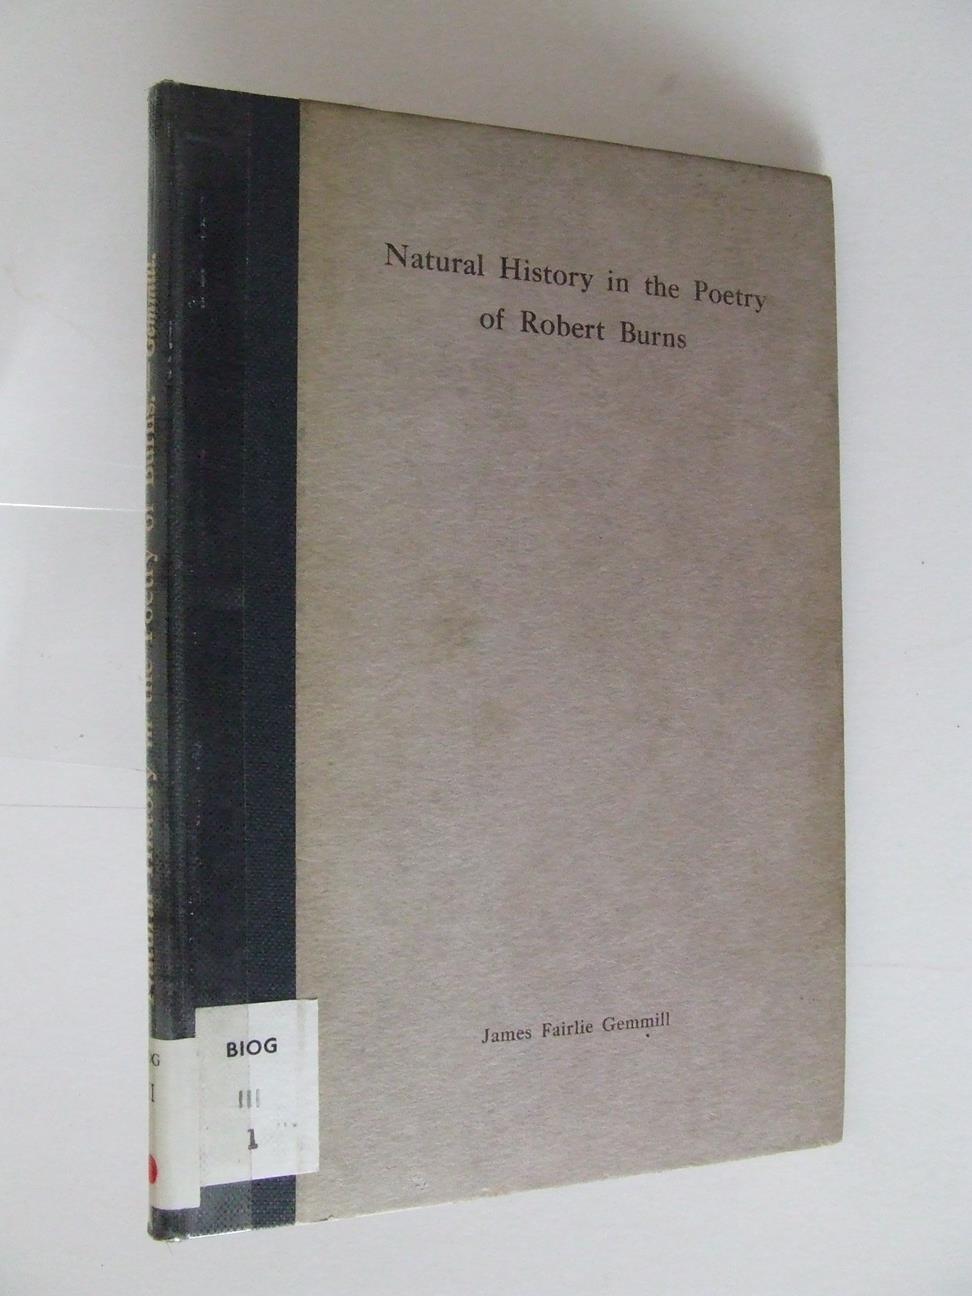 Natural History in the Poetry of Robert Burns